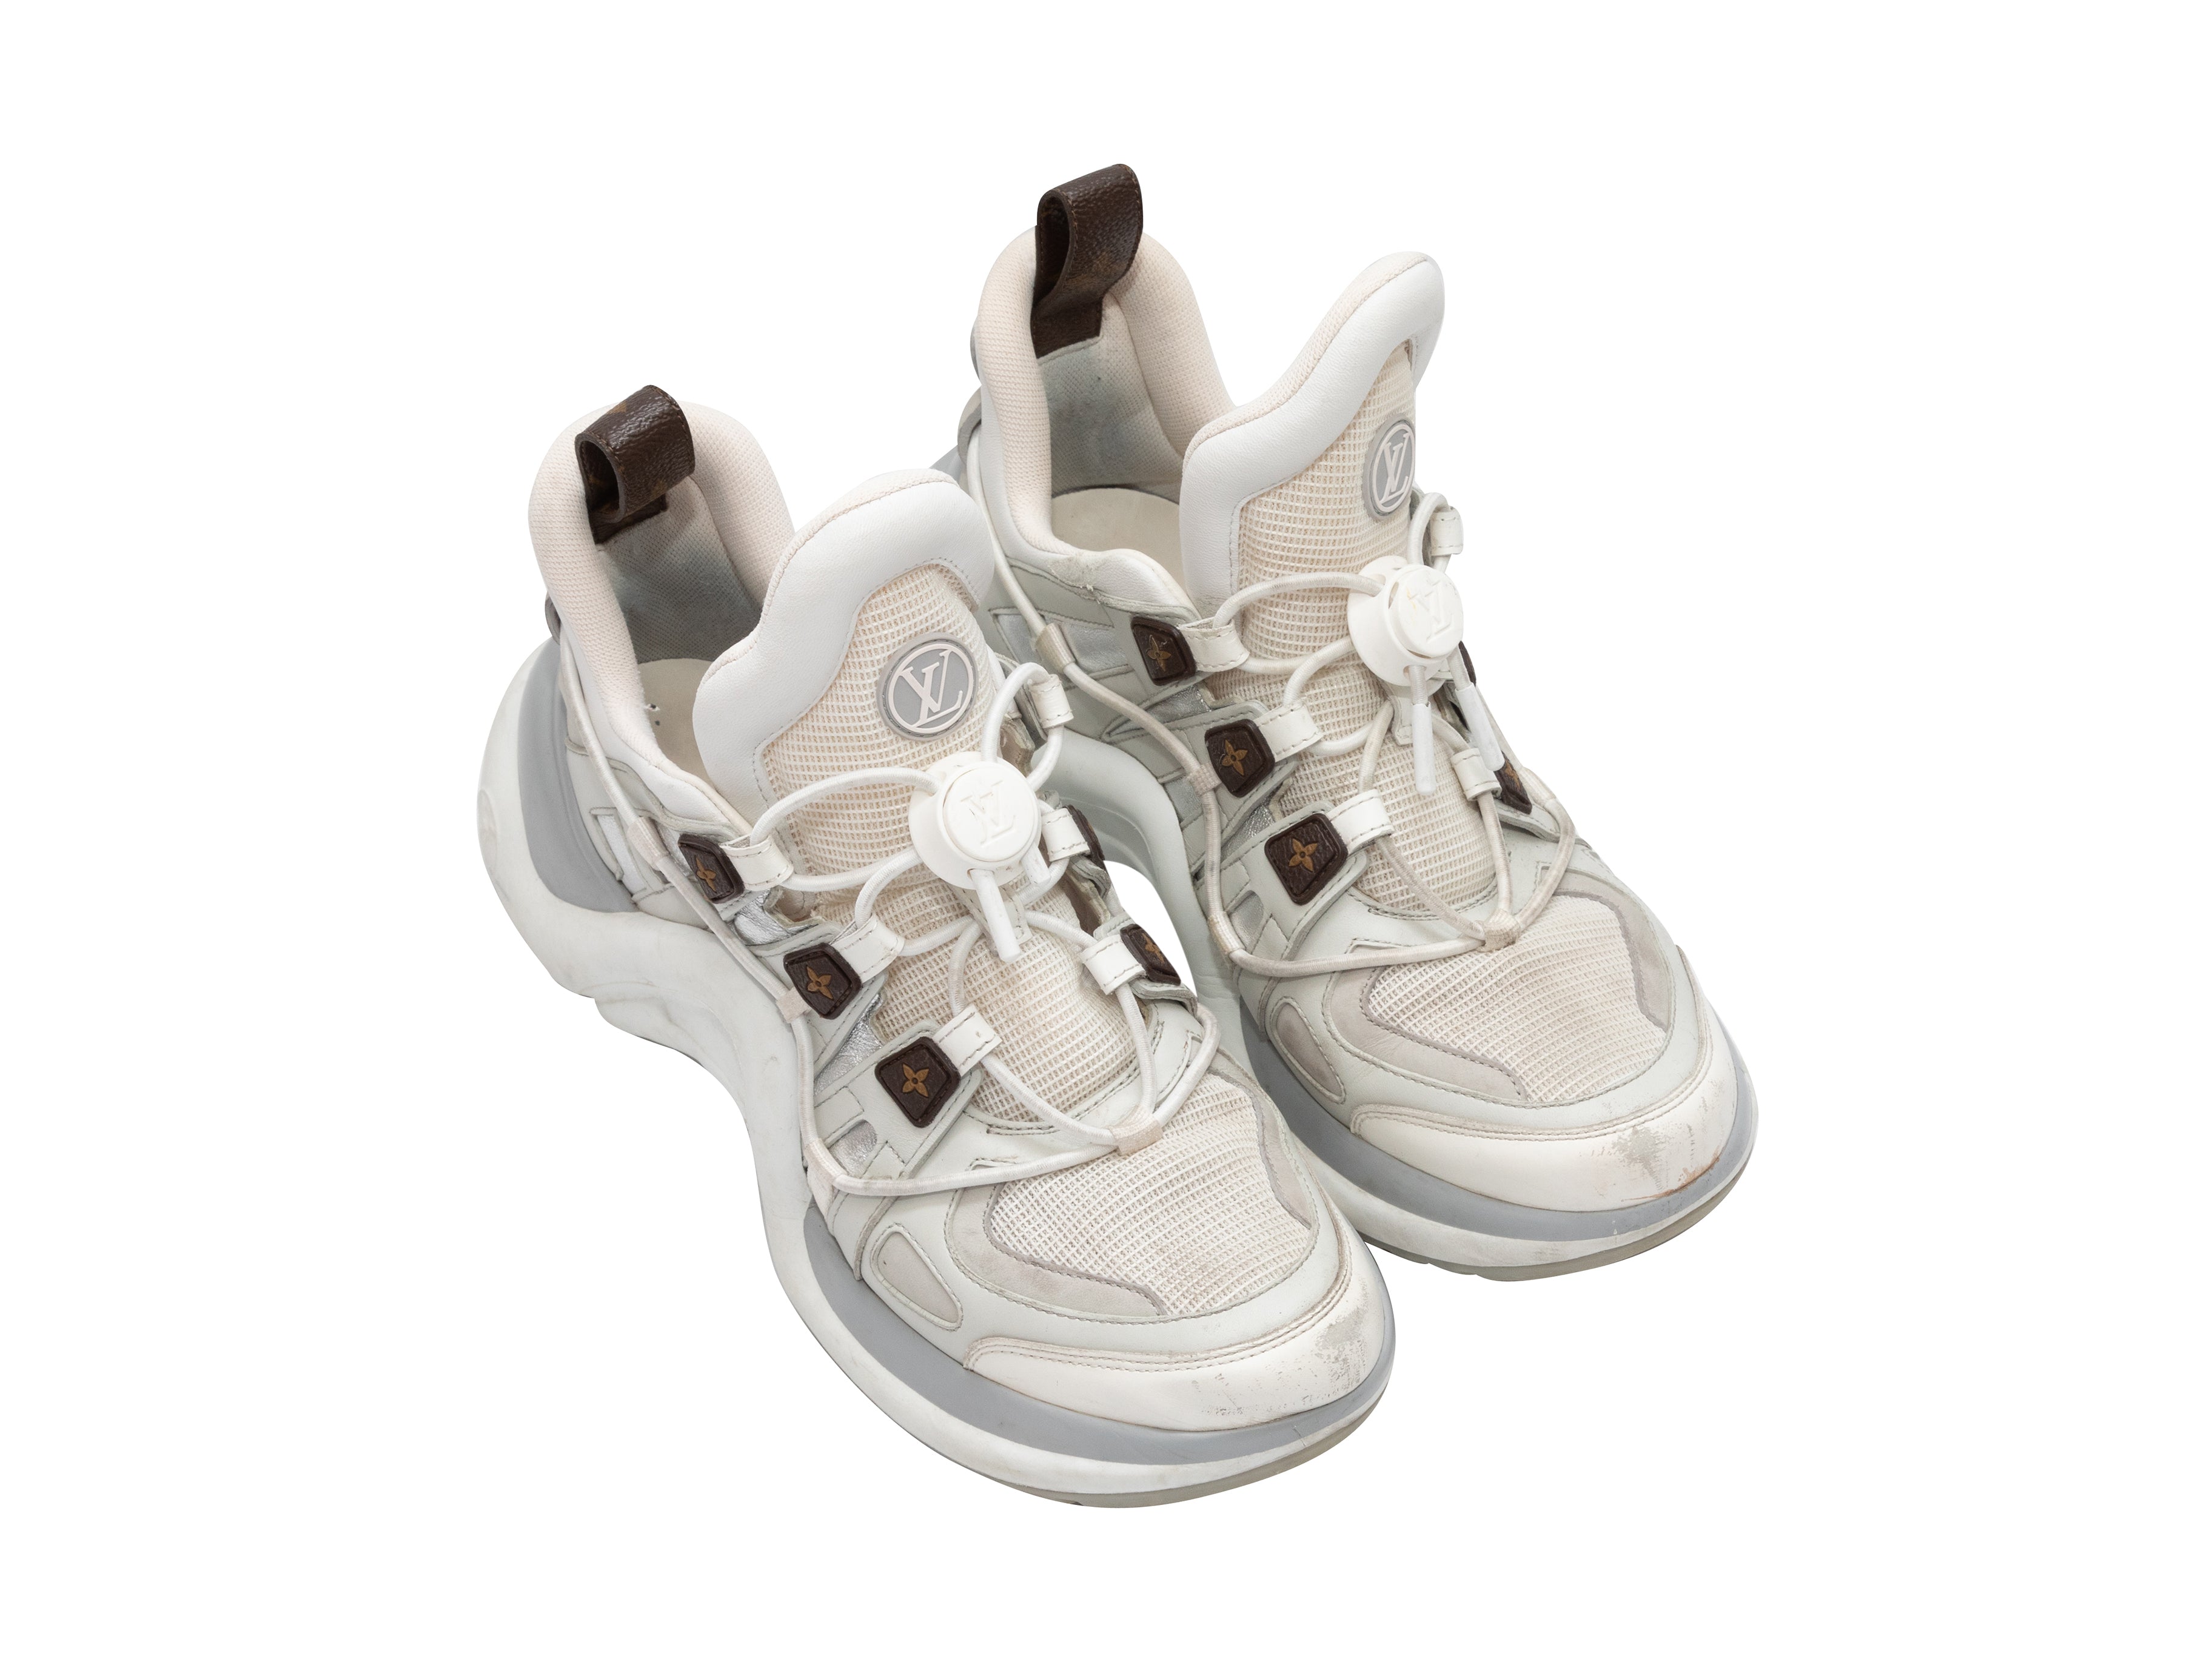 Louis Vuitton Archlight Low-top Sneakers